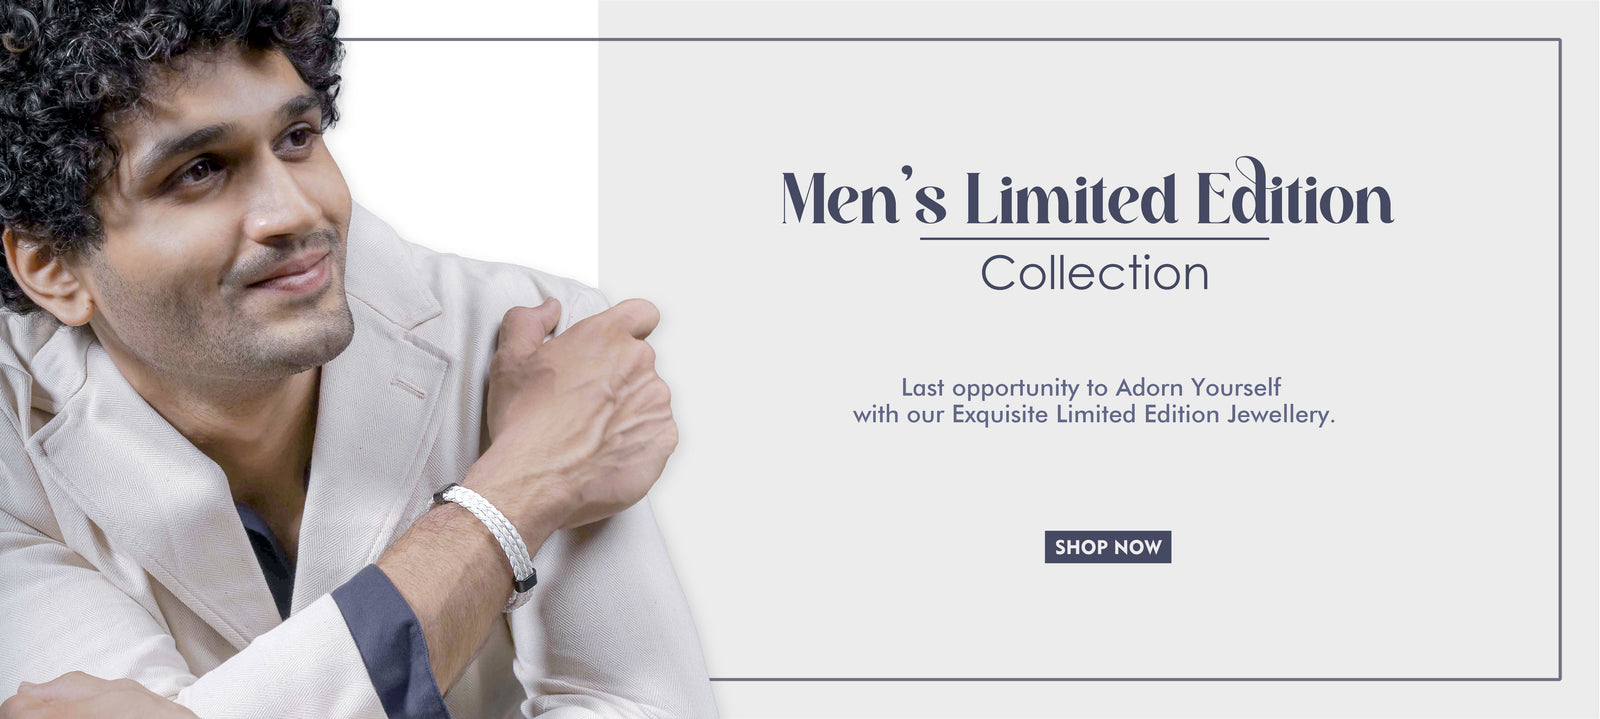 Men's Limited Edition Collection